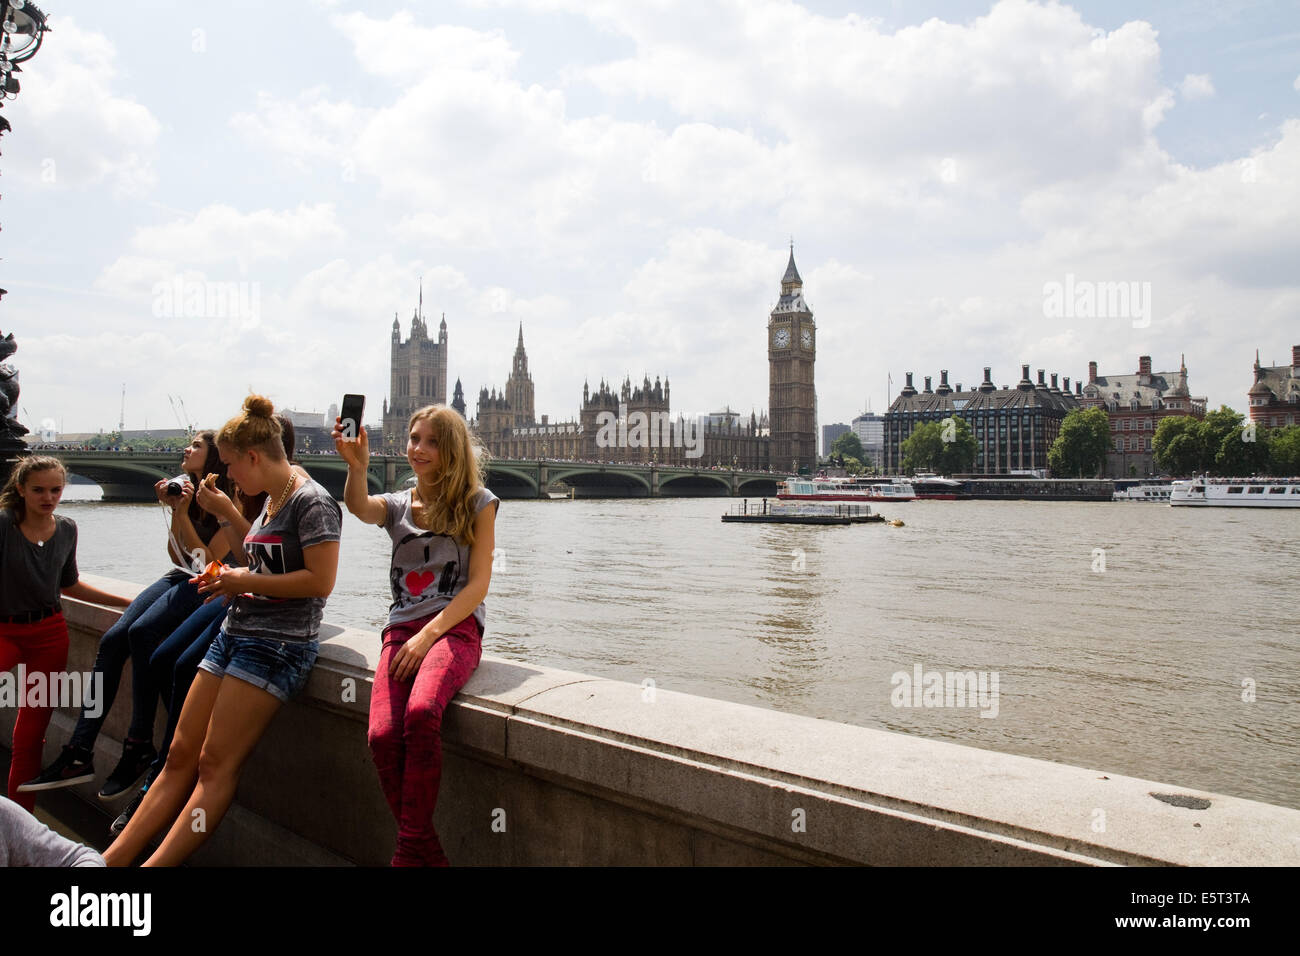 A young woman takes a selfie next to the River Thames in London Stock Photo